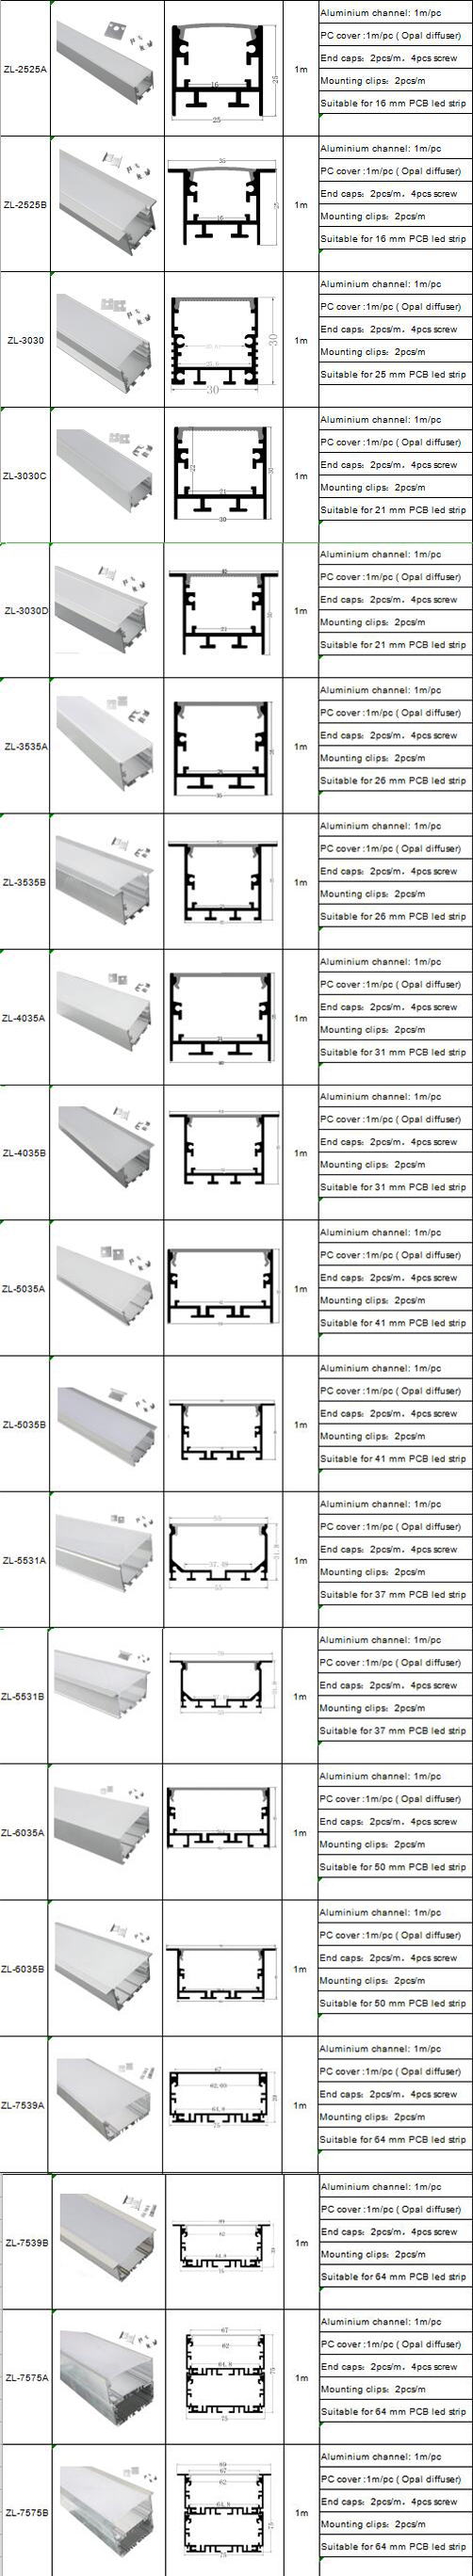 2020 Plaster Drywall 28*14m Extrusion Anodizing LED Aluminum Channel for LED Strip Plaster Recessed LED Aluminum Profile